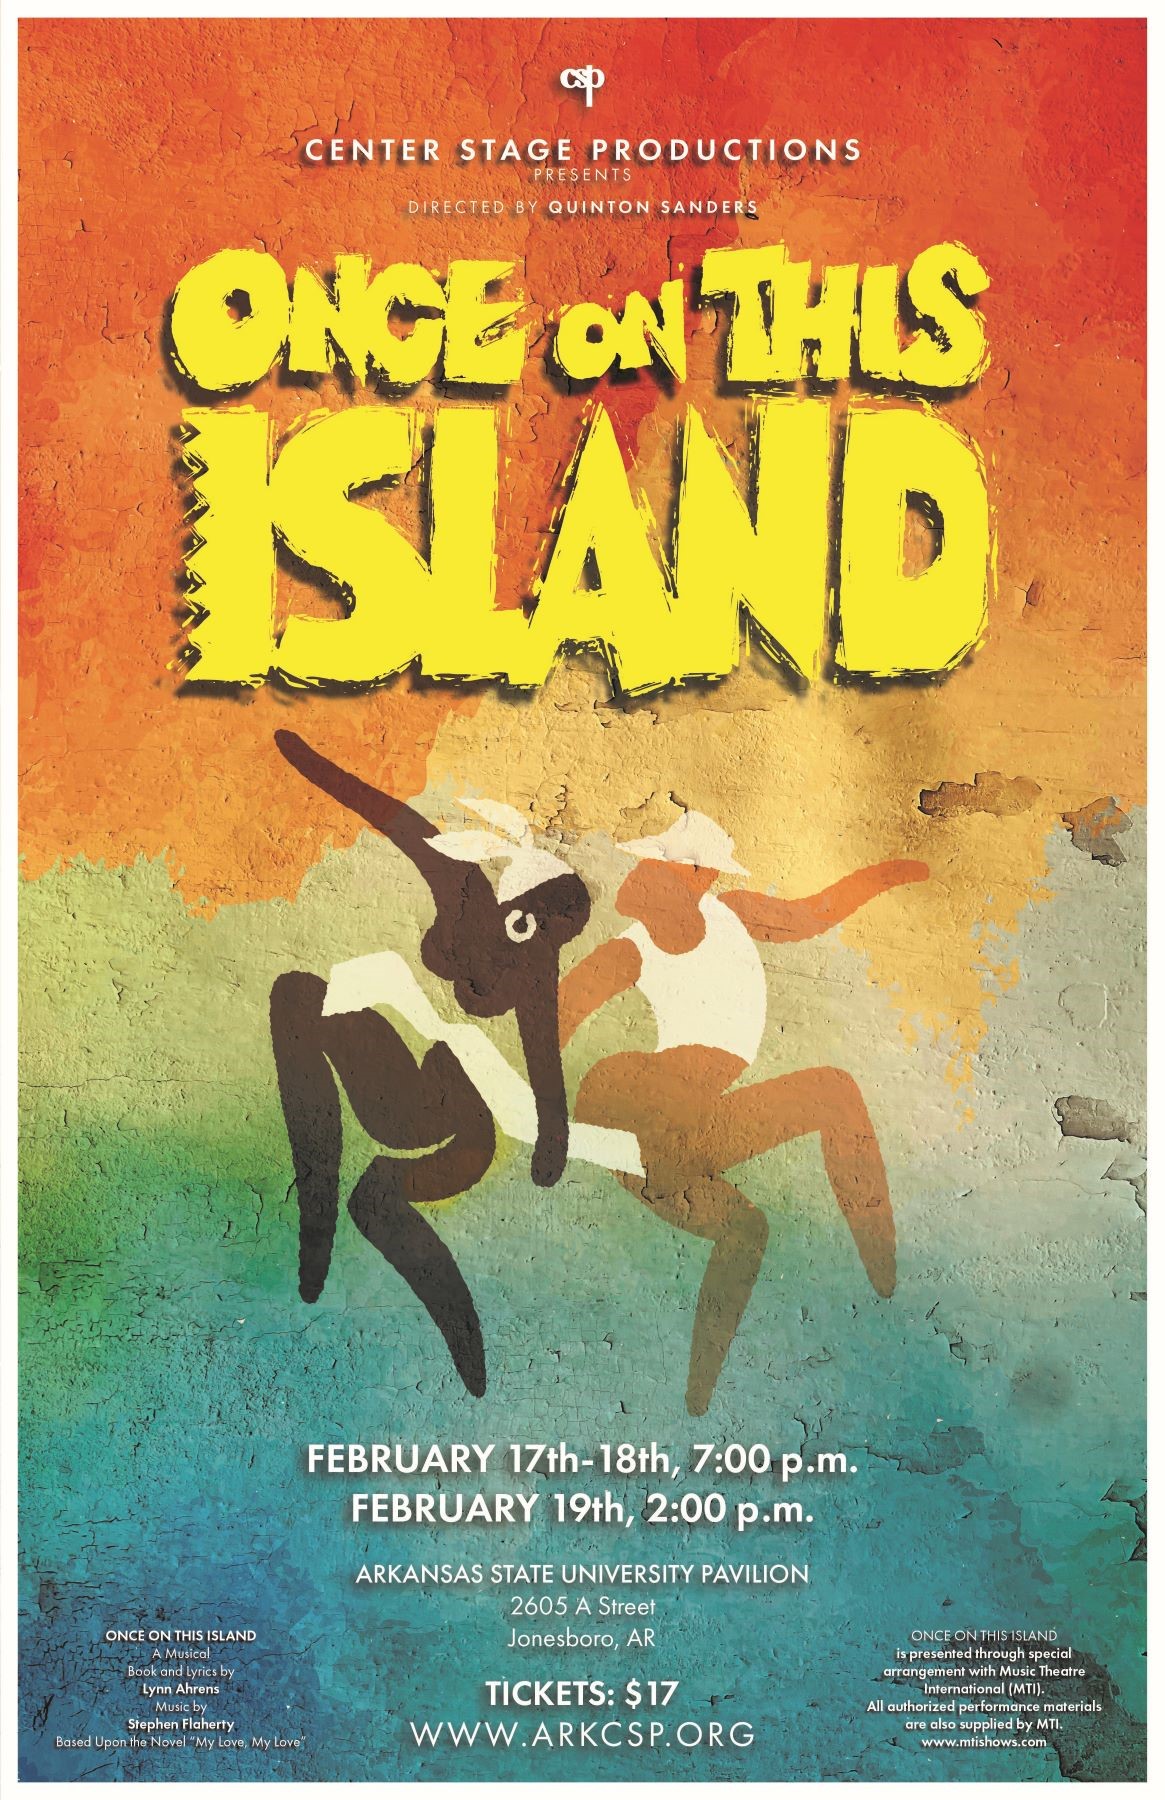 Once On This Island  on Feb 17, 19:00@ASU pavilion - Buy tickets and Get information on Center Stage Productions 